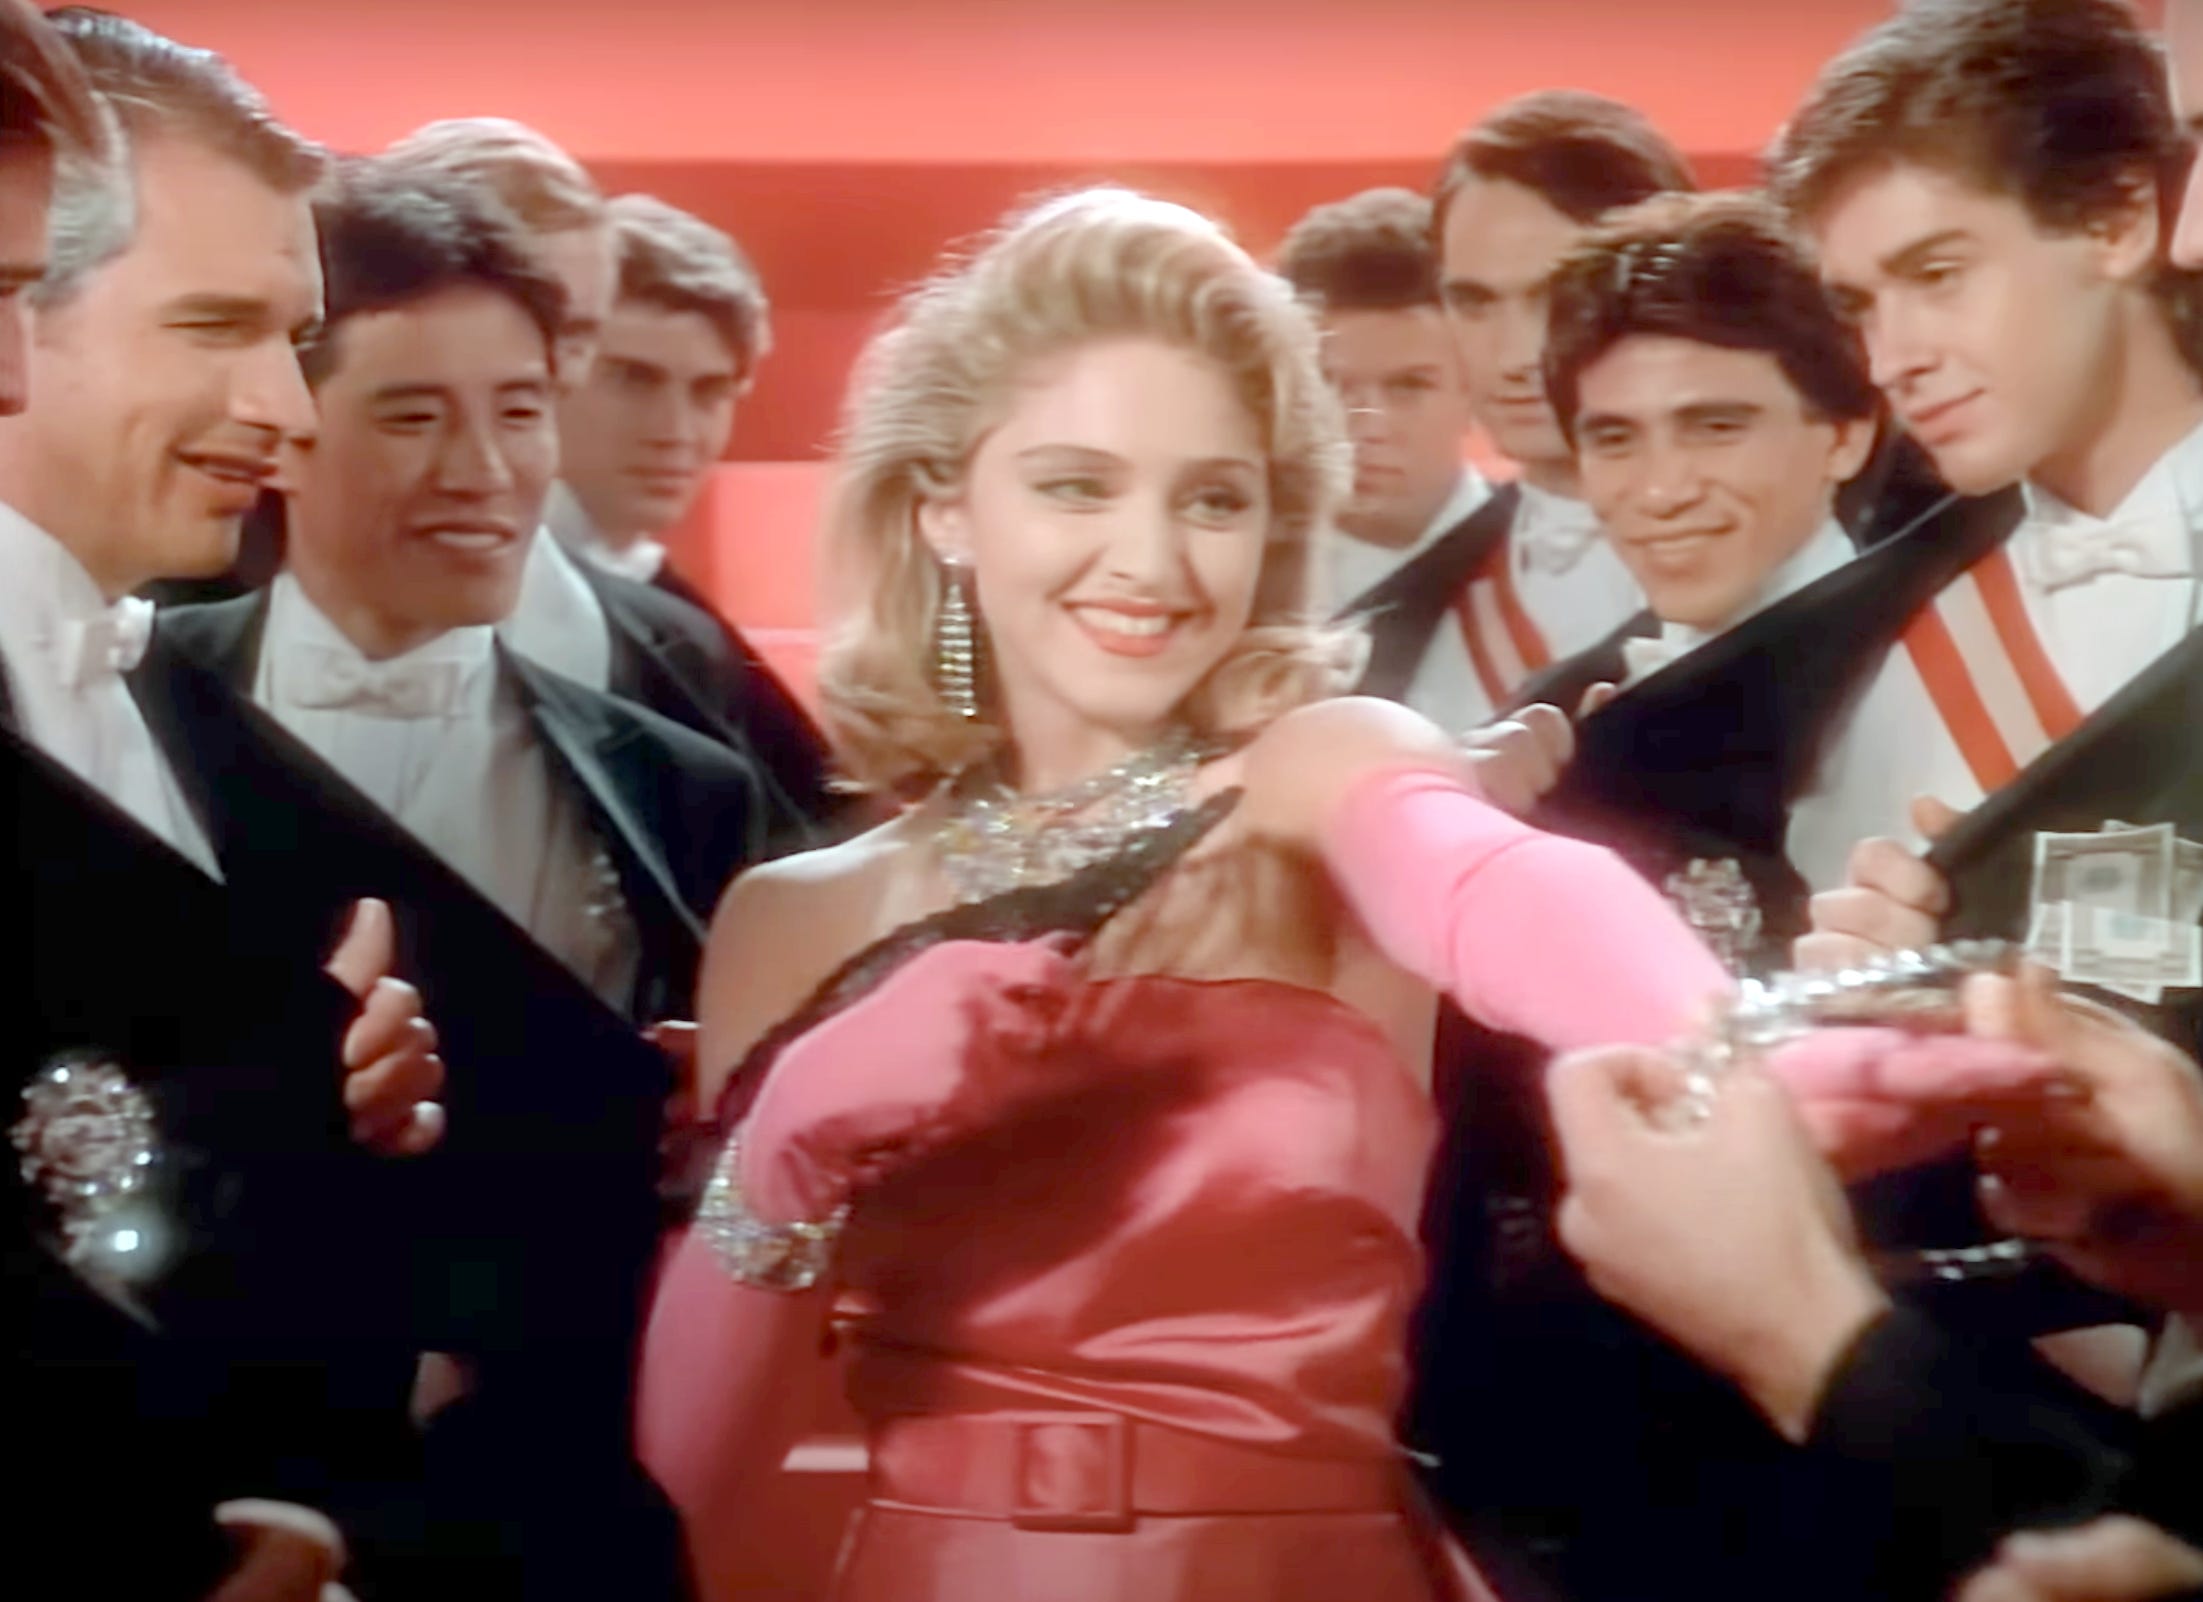 Classic film in music videos: Material Girl by Madonna